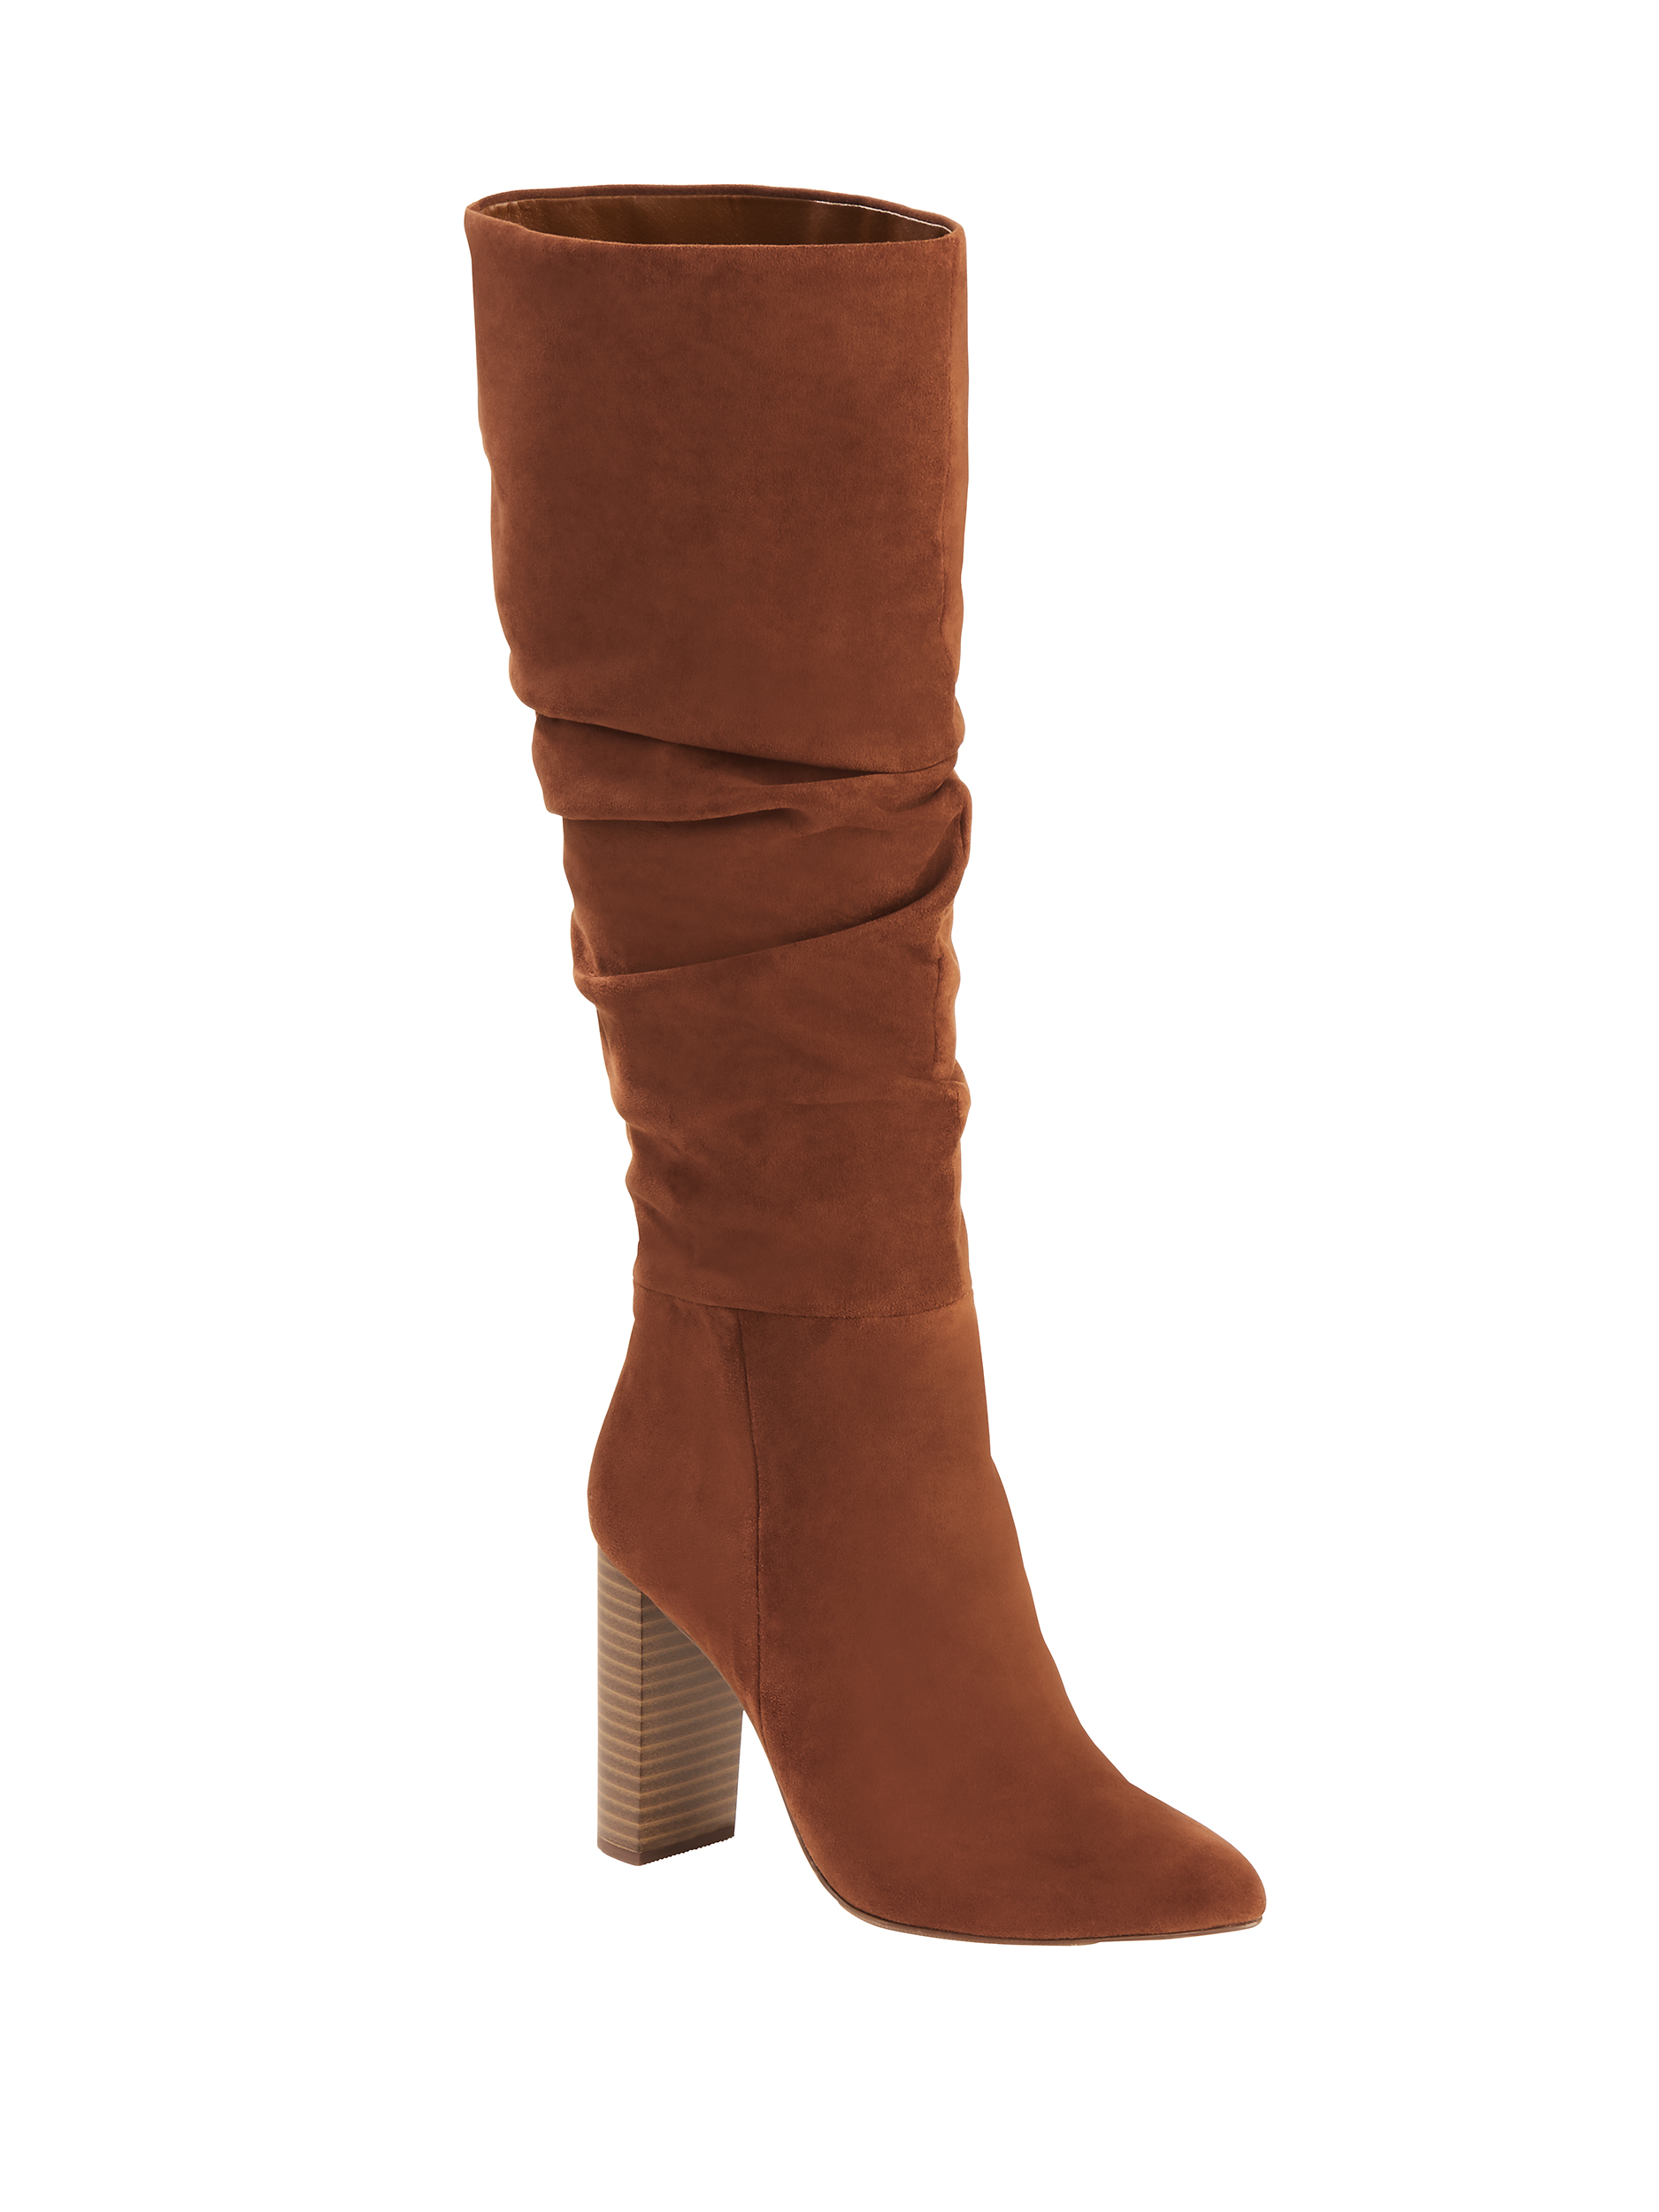 Scoop Women’s Penny Microsuede Slouch Boots - image 1 of 6